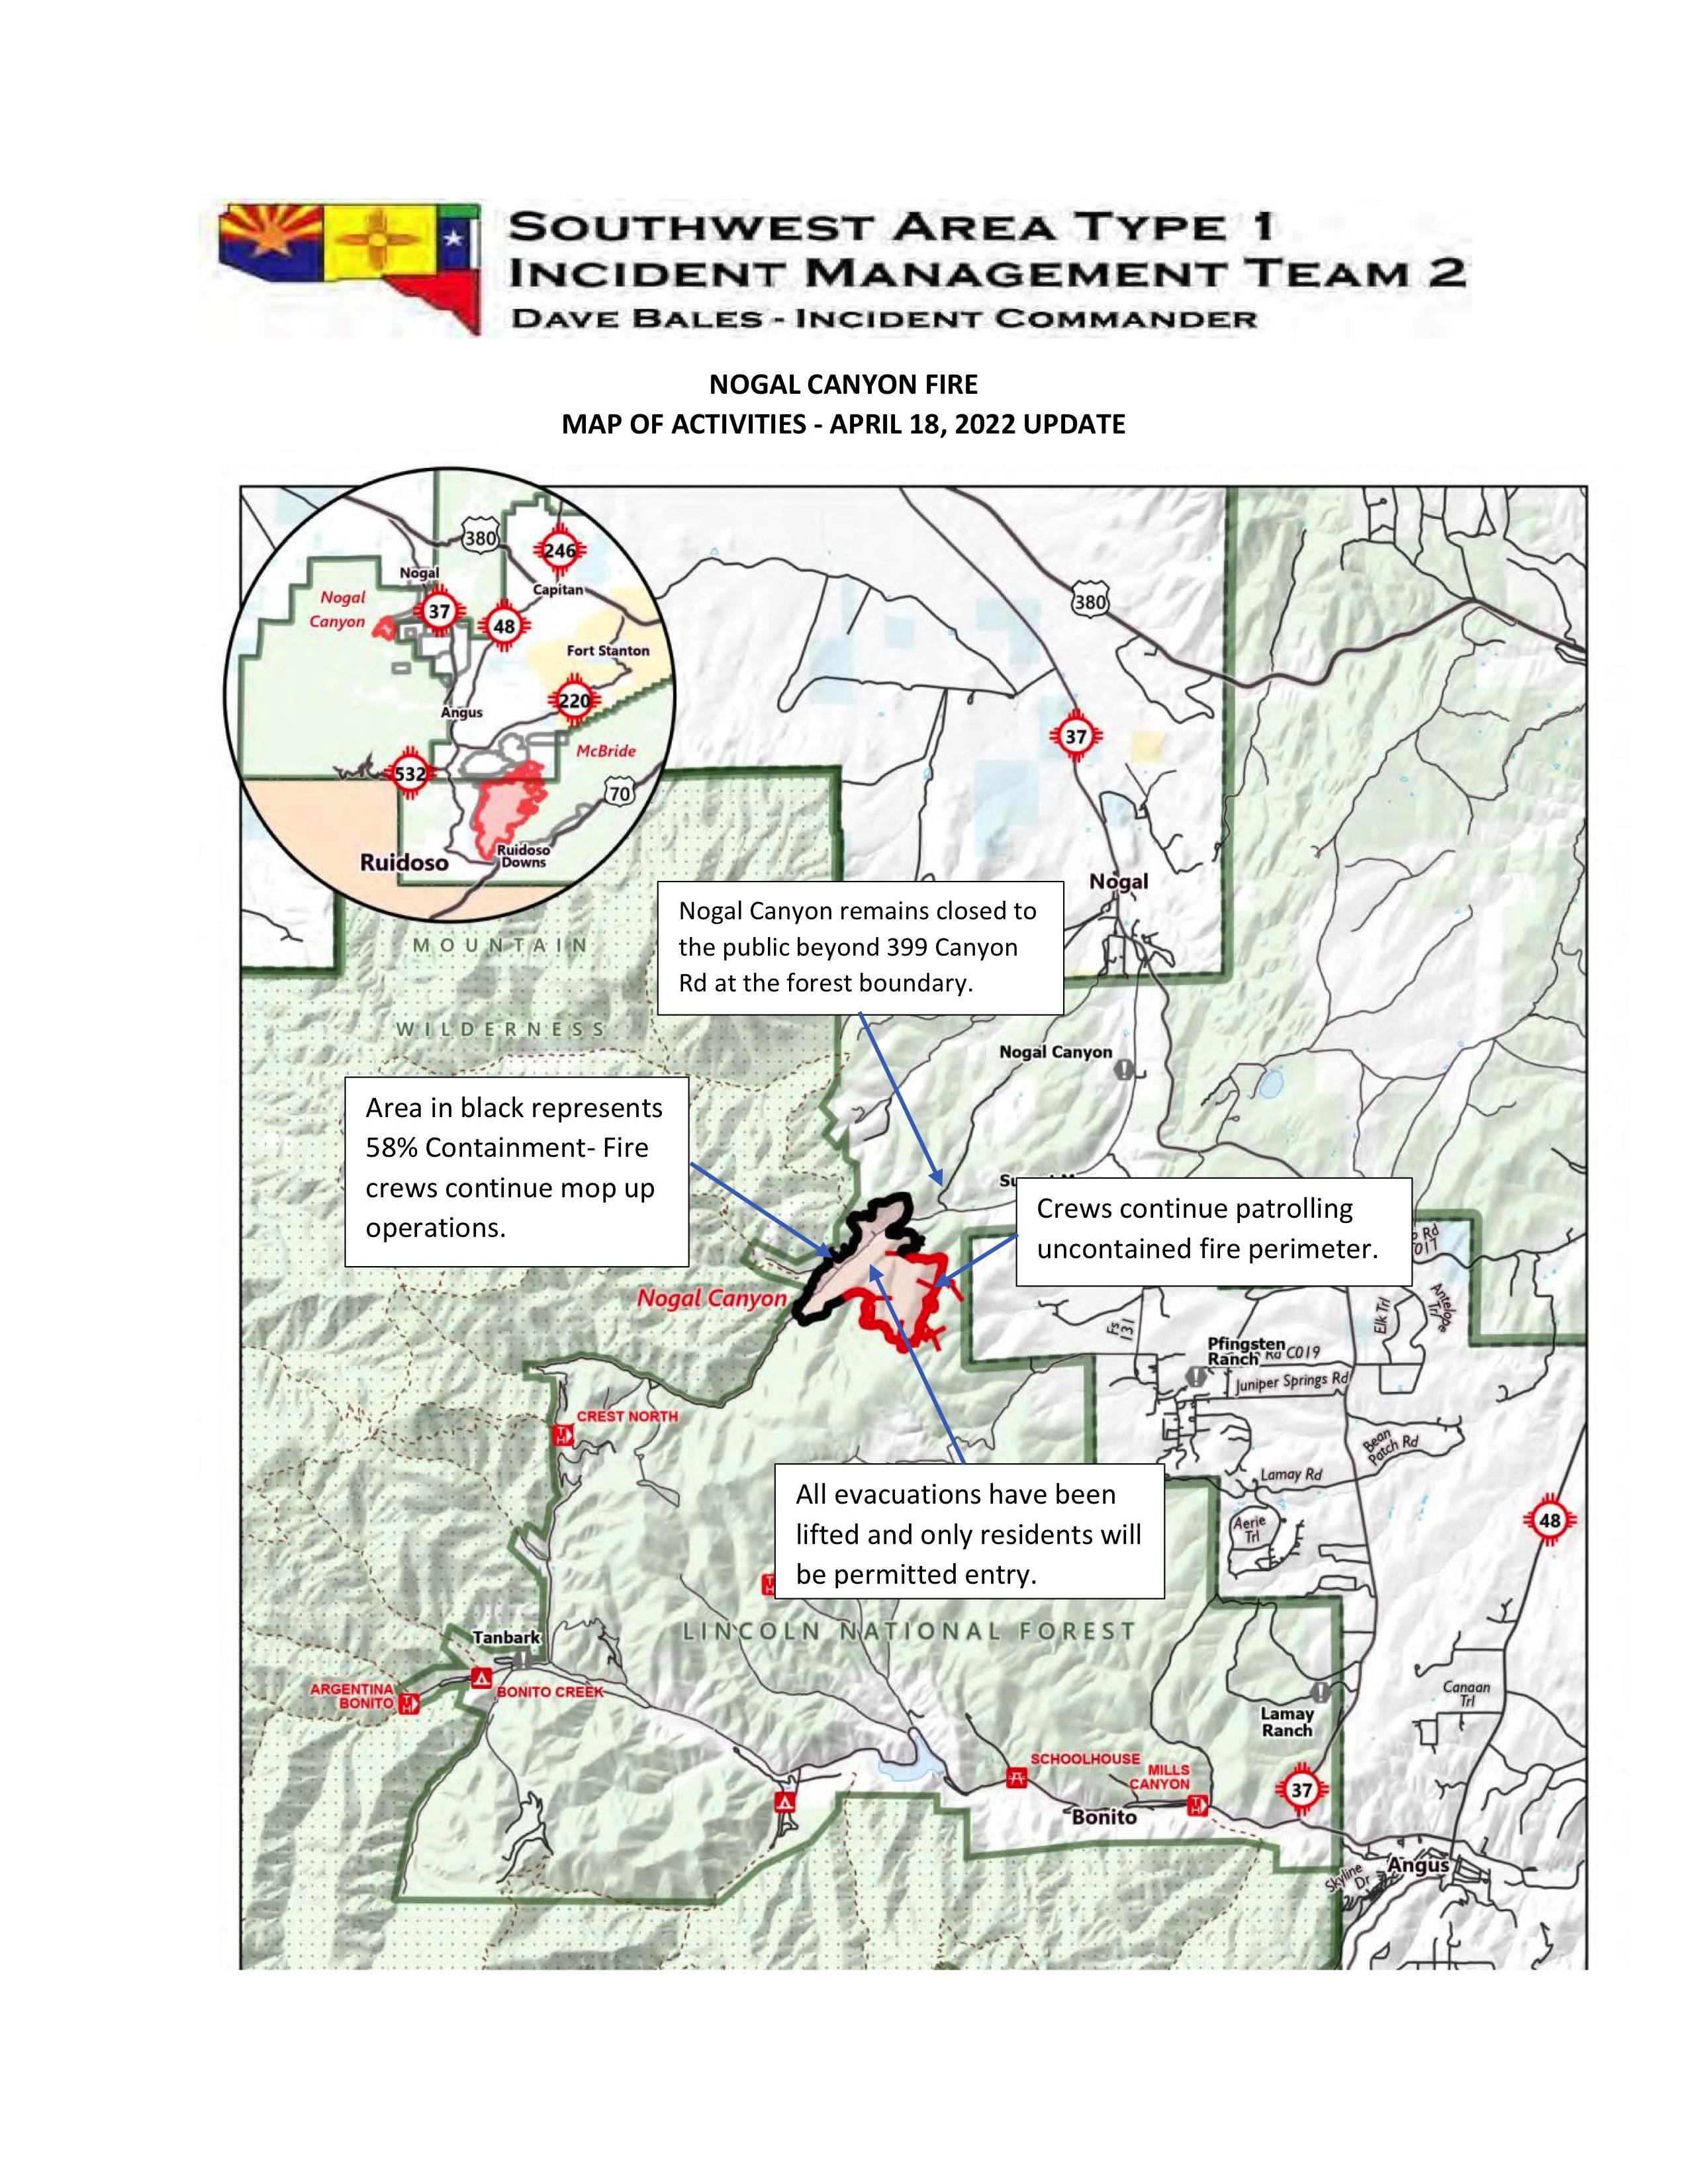 Nogal Canyon Fire Map of Activity April 18, 2022